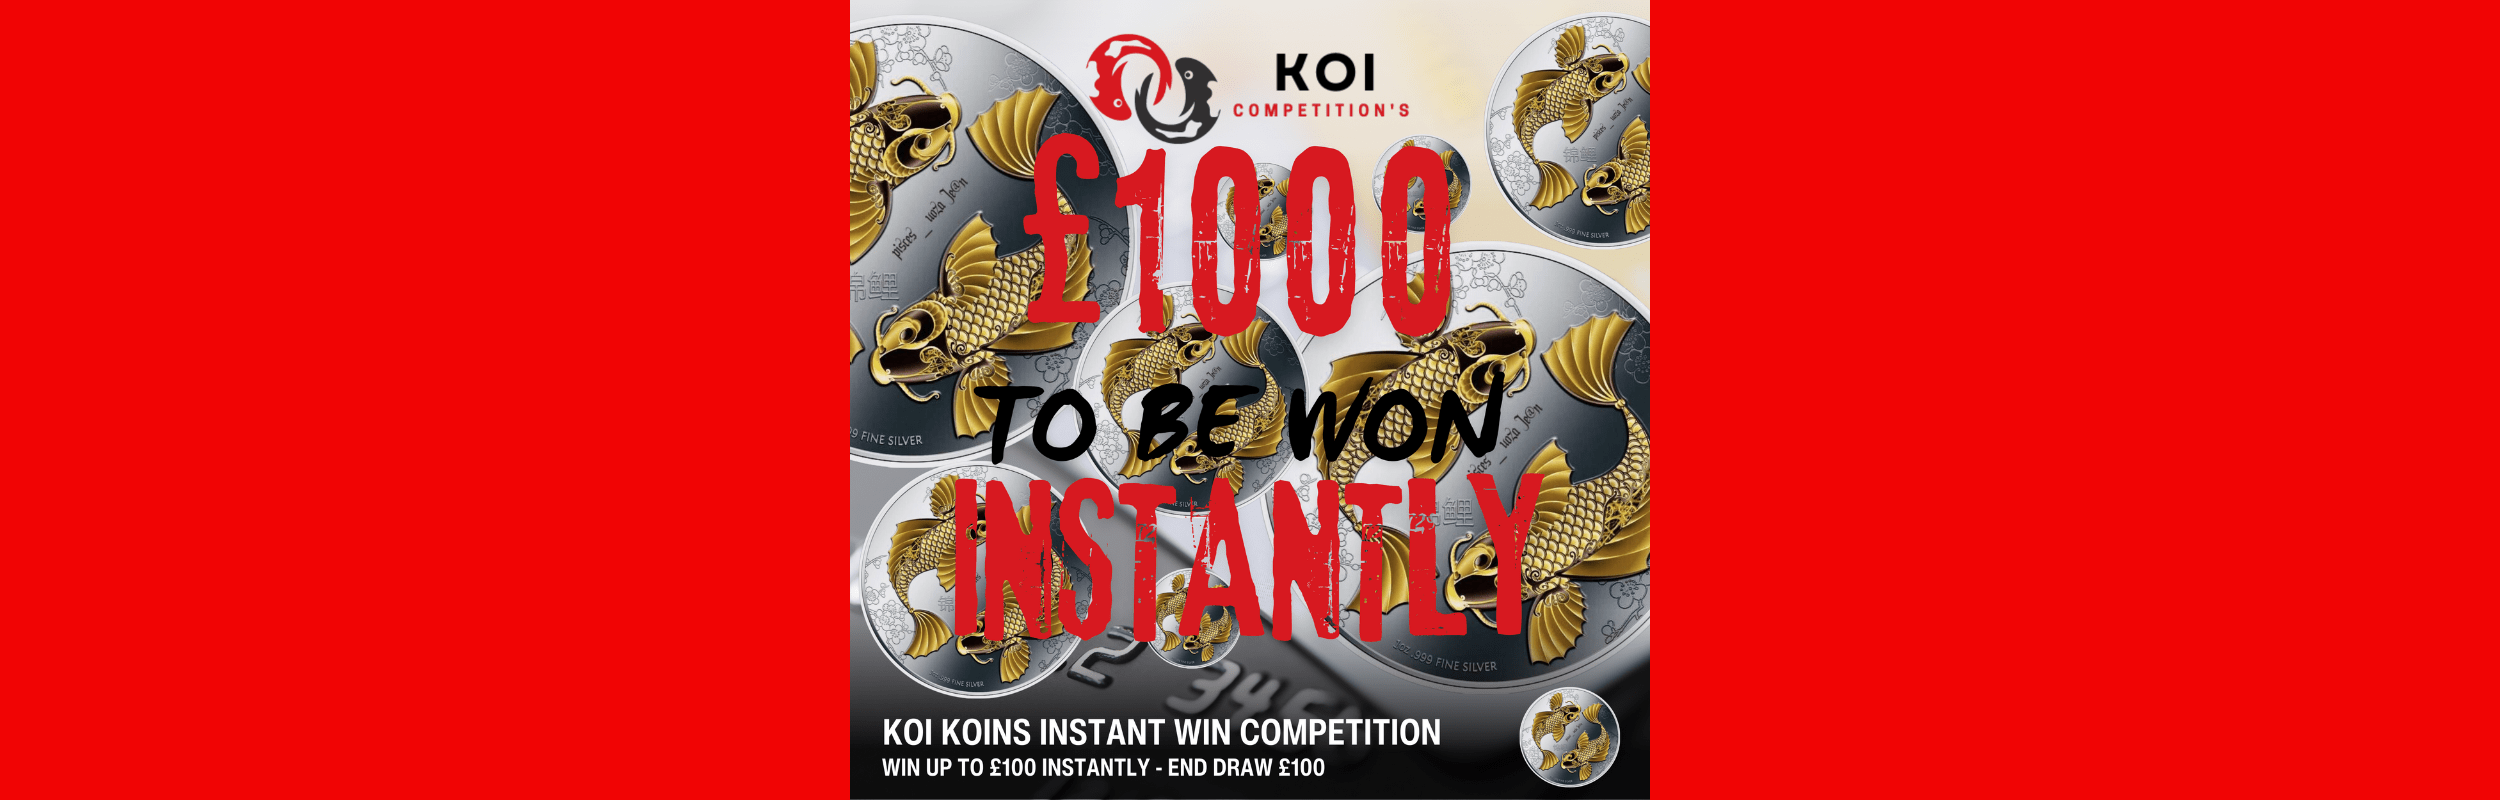 KOI KOINS INSTANT WIN COMPETITION